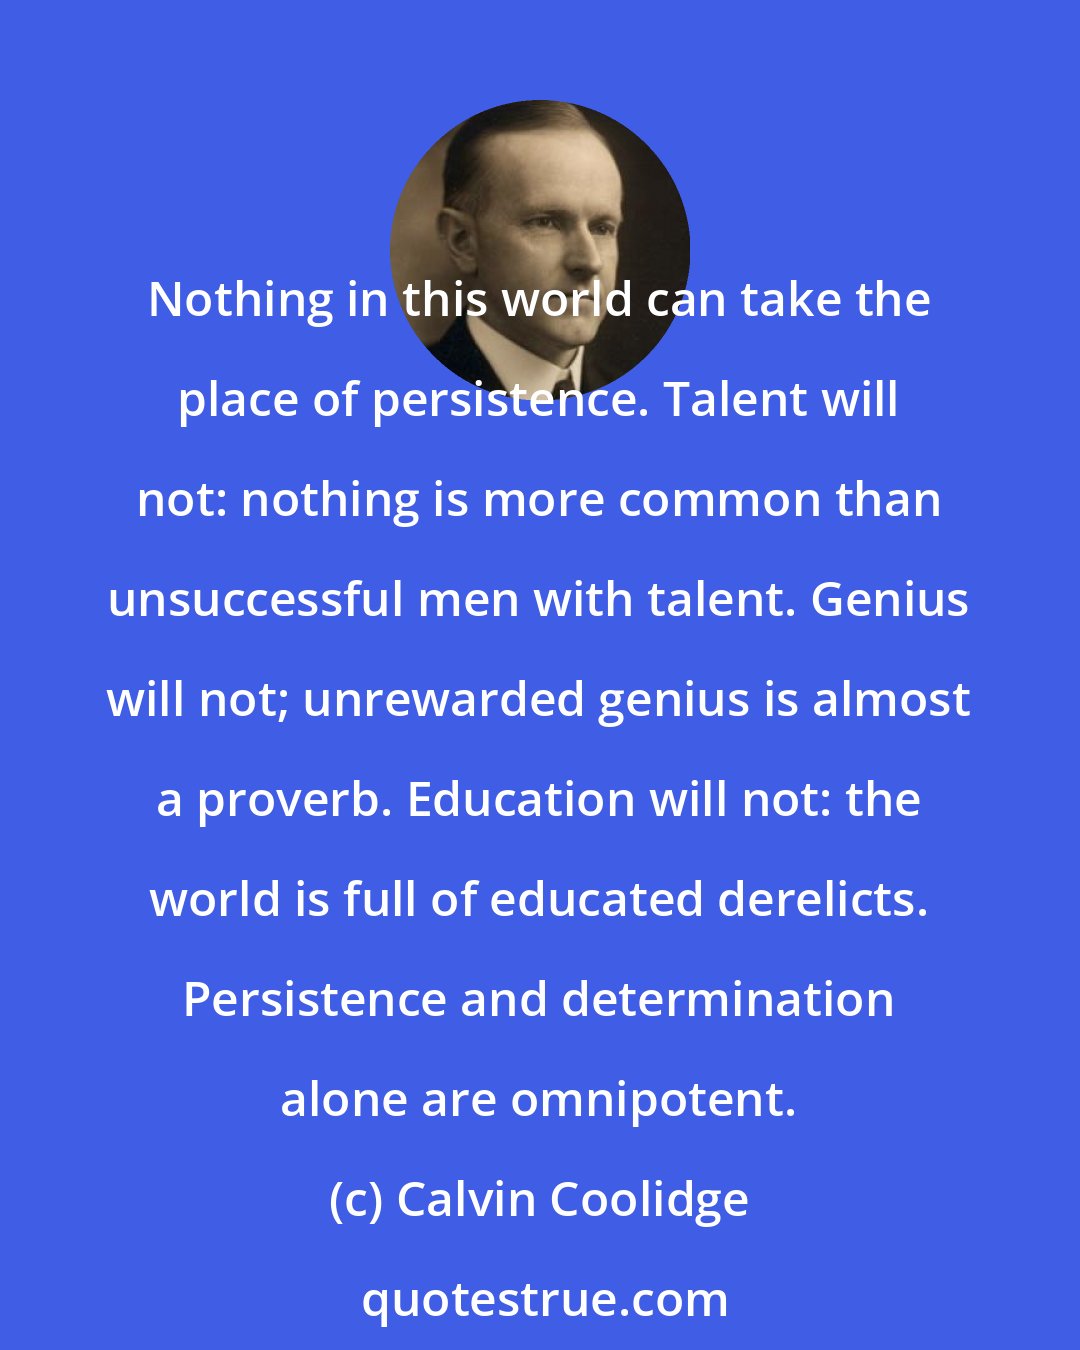 Calvin Coolidge: Nothing in this world can take the place of persistence. Talent will not: nothing is more common than unsuccessful men with talent. Genius will not; unrewarded genius is almost a proverb. Education will not: the world is full of educated derelicts. Persistence and determination alone are omnipotent.